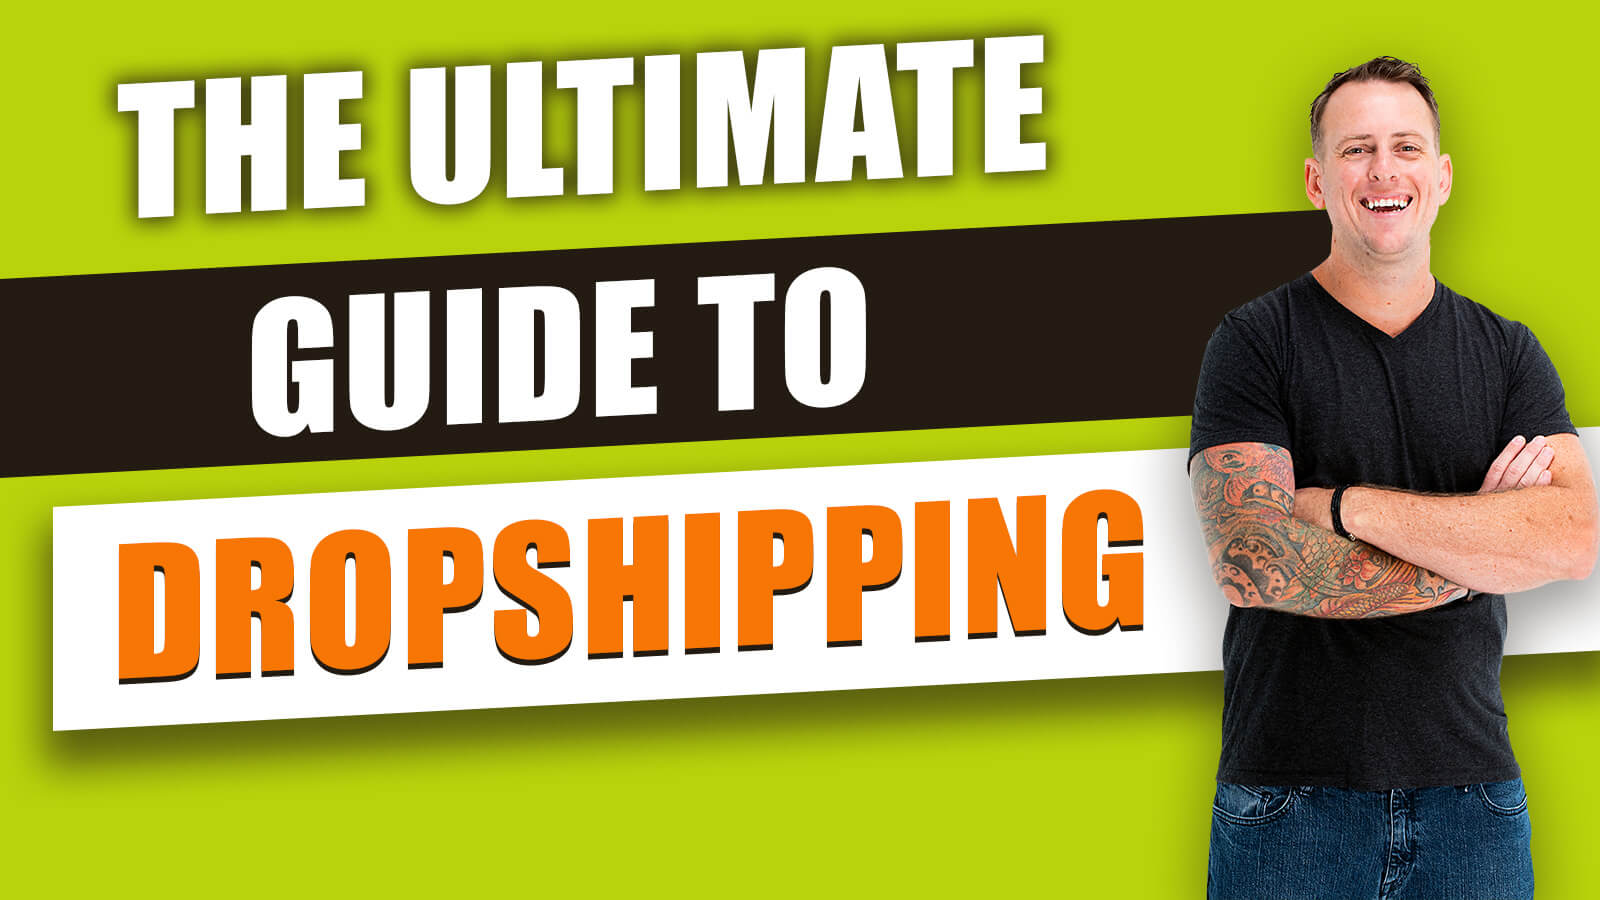 Dropshipping guide